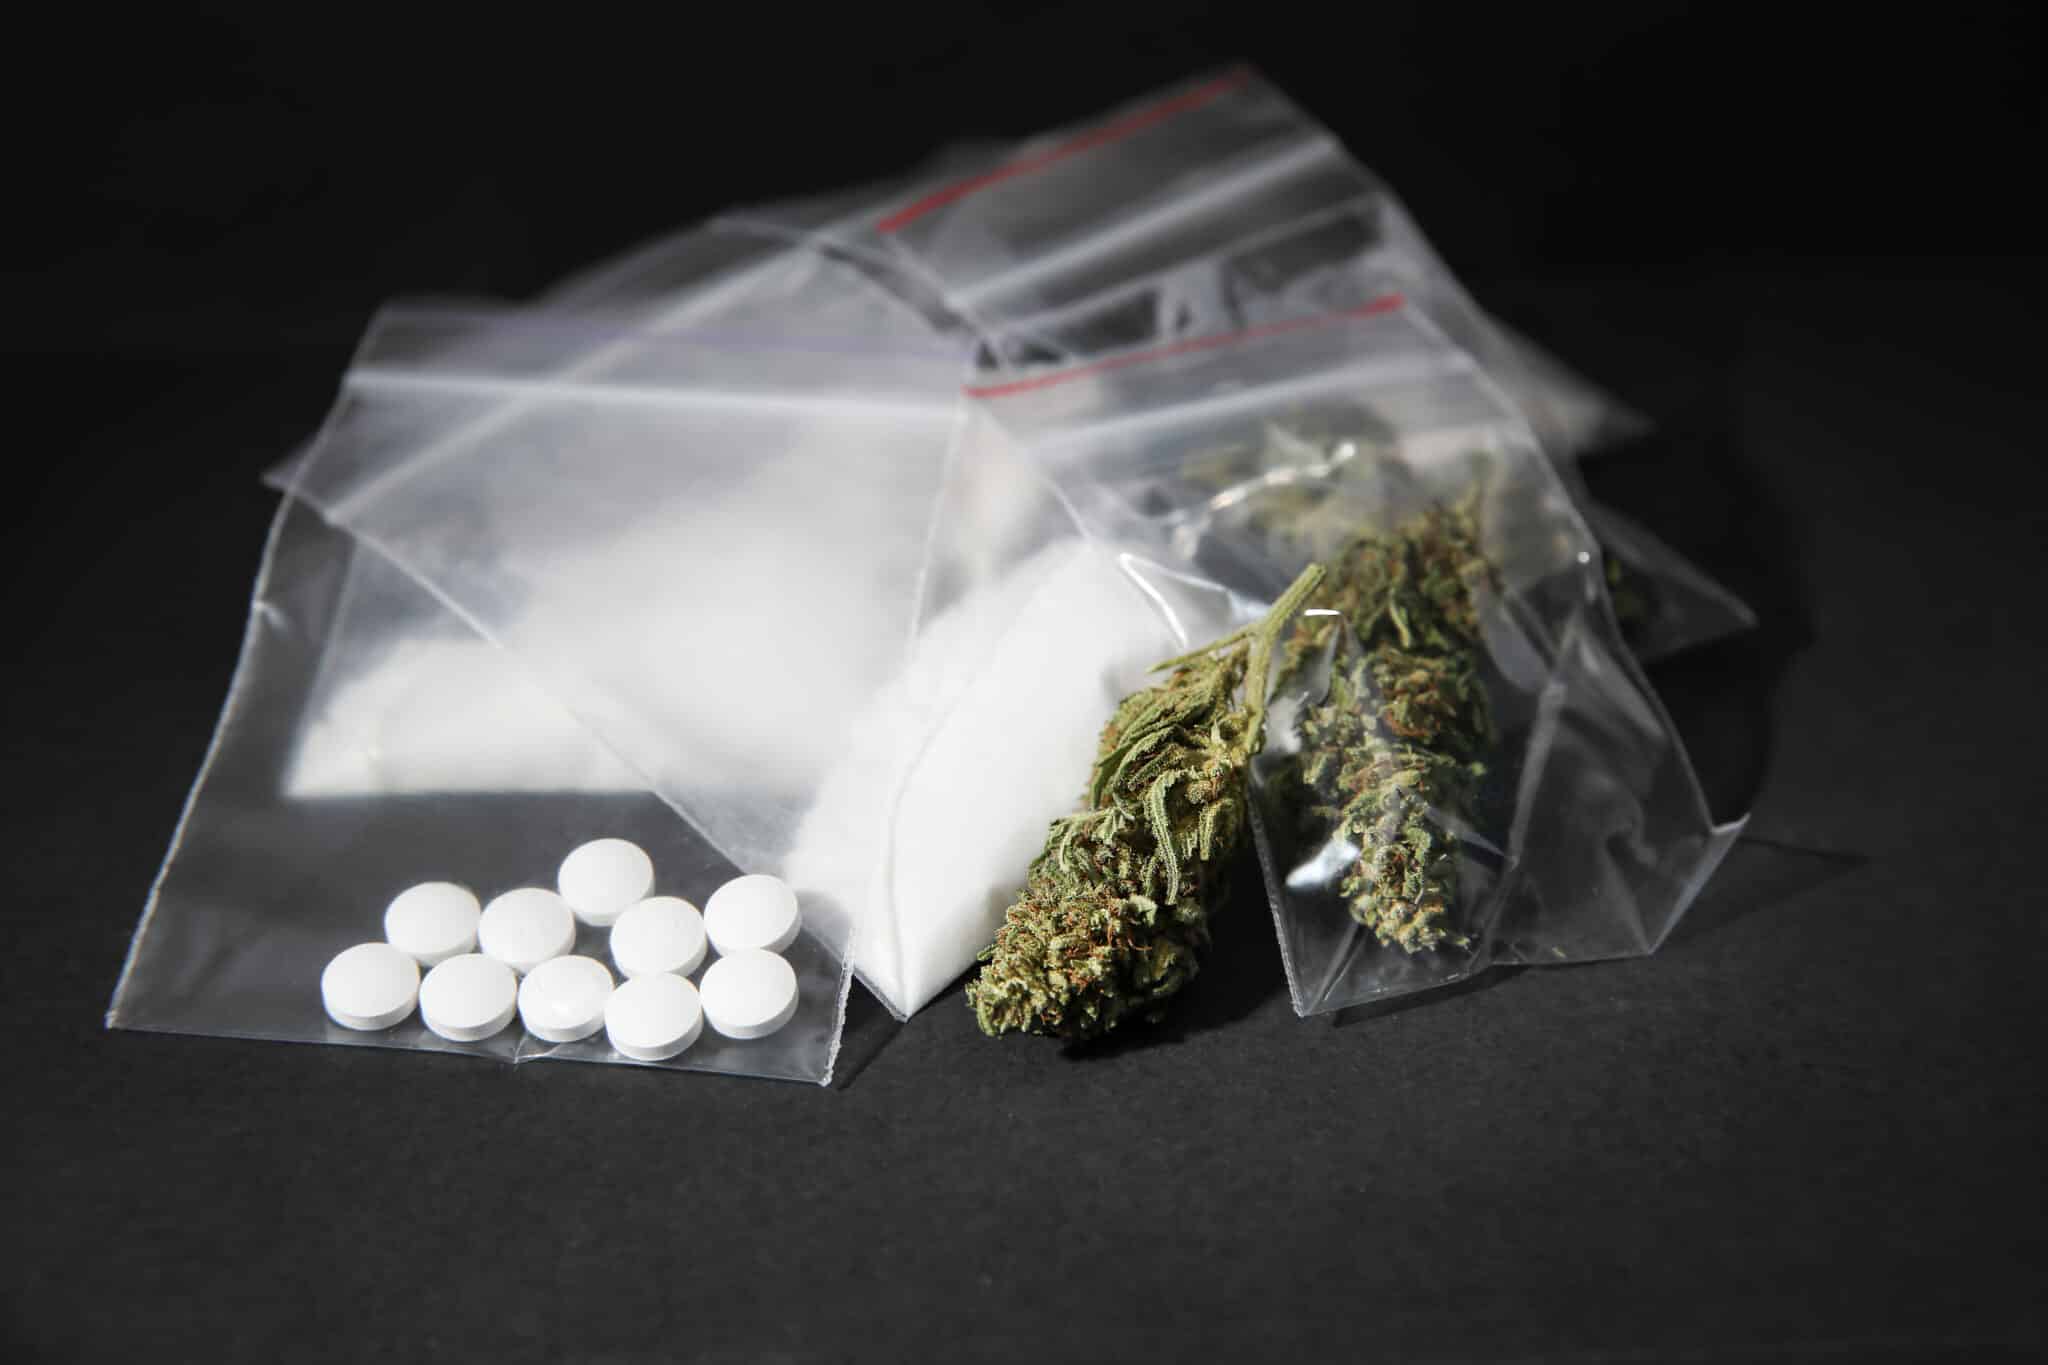 Bags of different types of illegal drugs (narcotics)